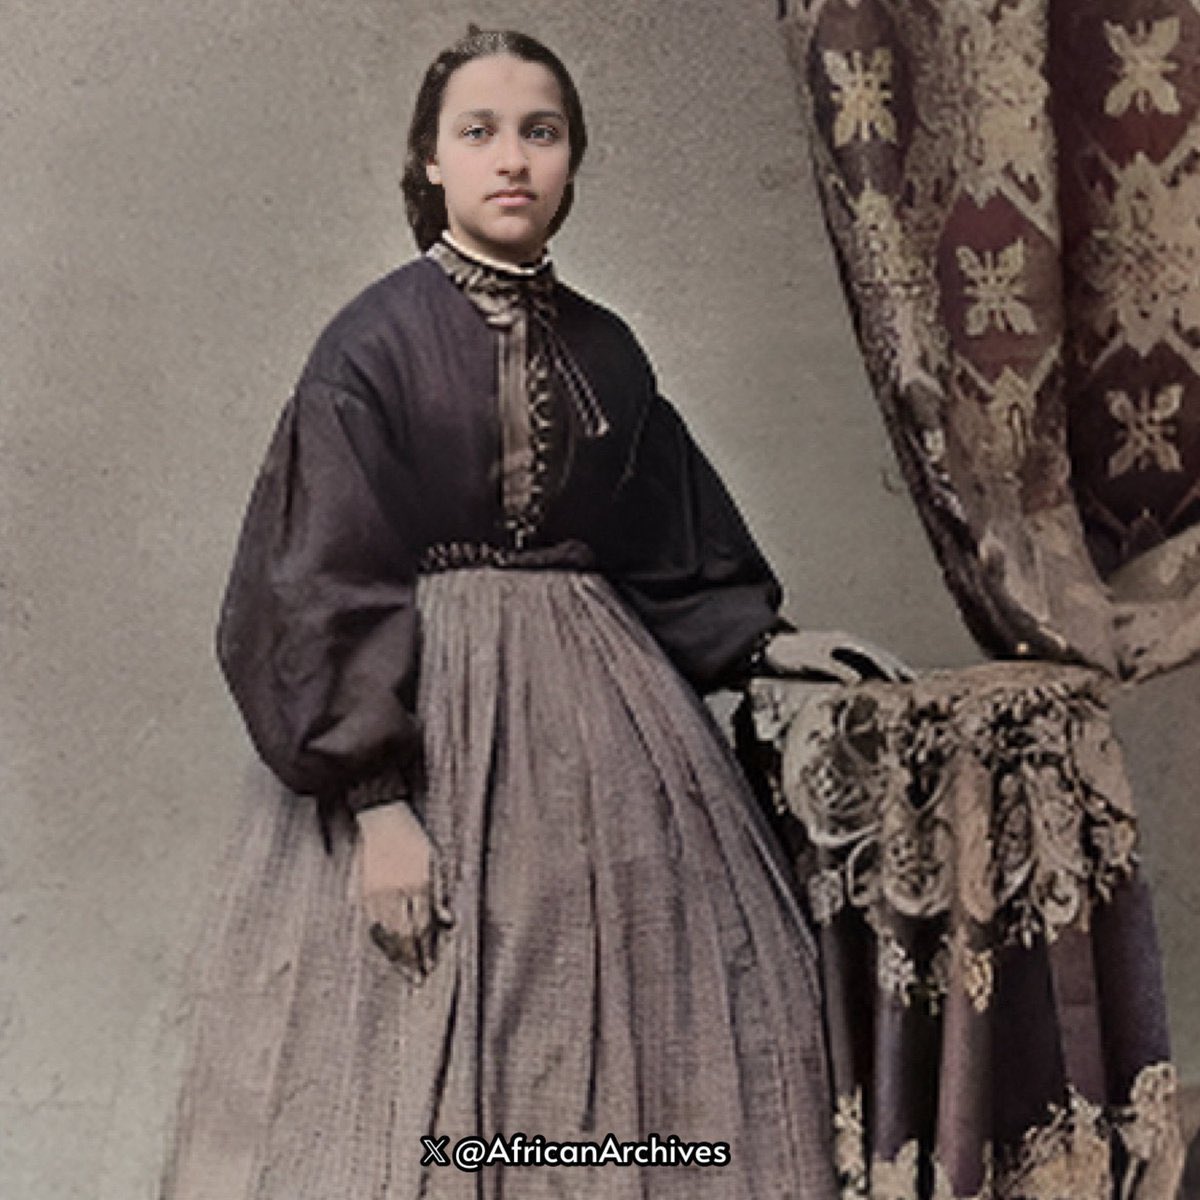 On this day in 1862, Mary Jane Patterson made history when she became the first black woman to receive a college degree when she graduated from Oberlin College. She was also the first black principal at America's first public high school for black students. (Preparatory High